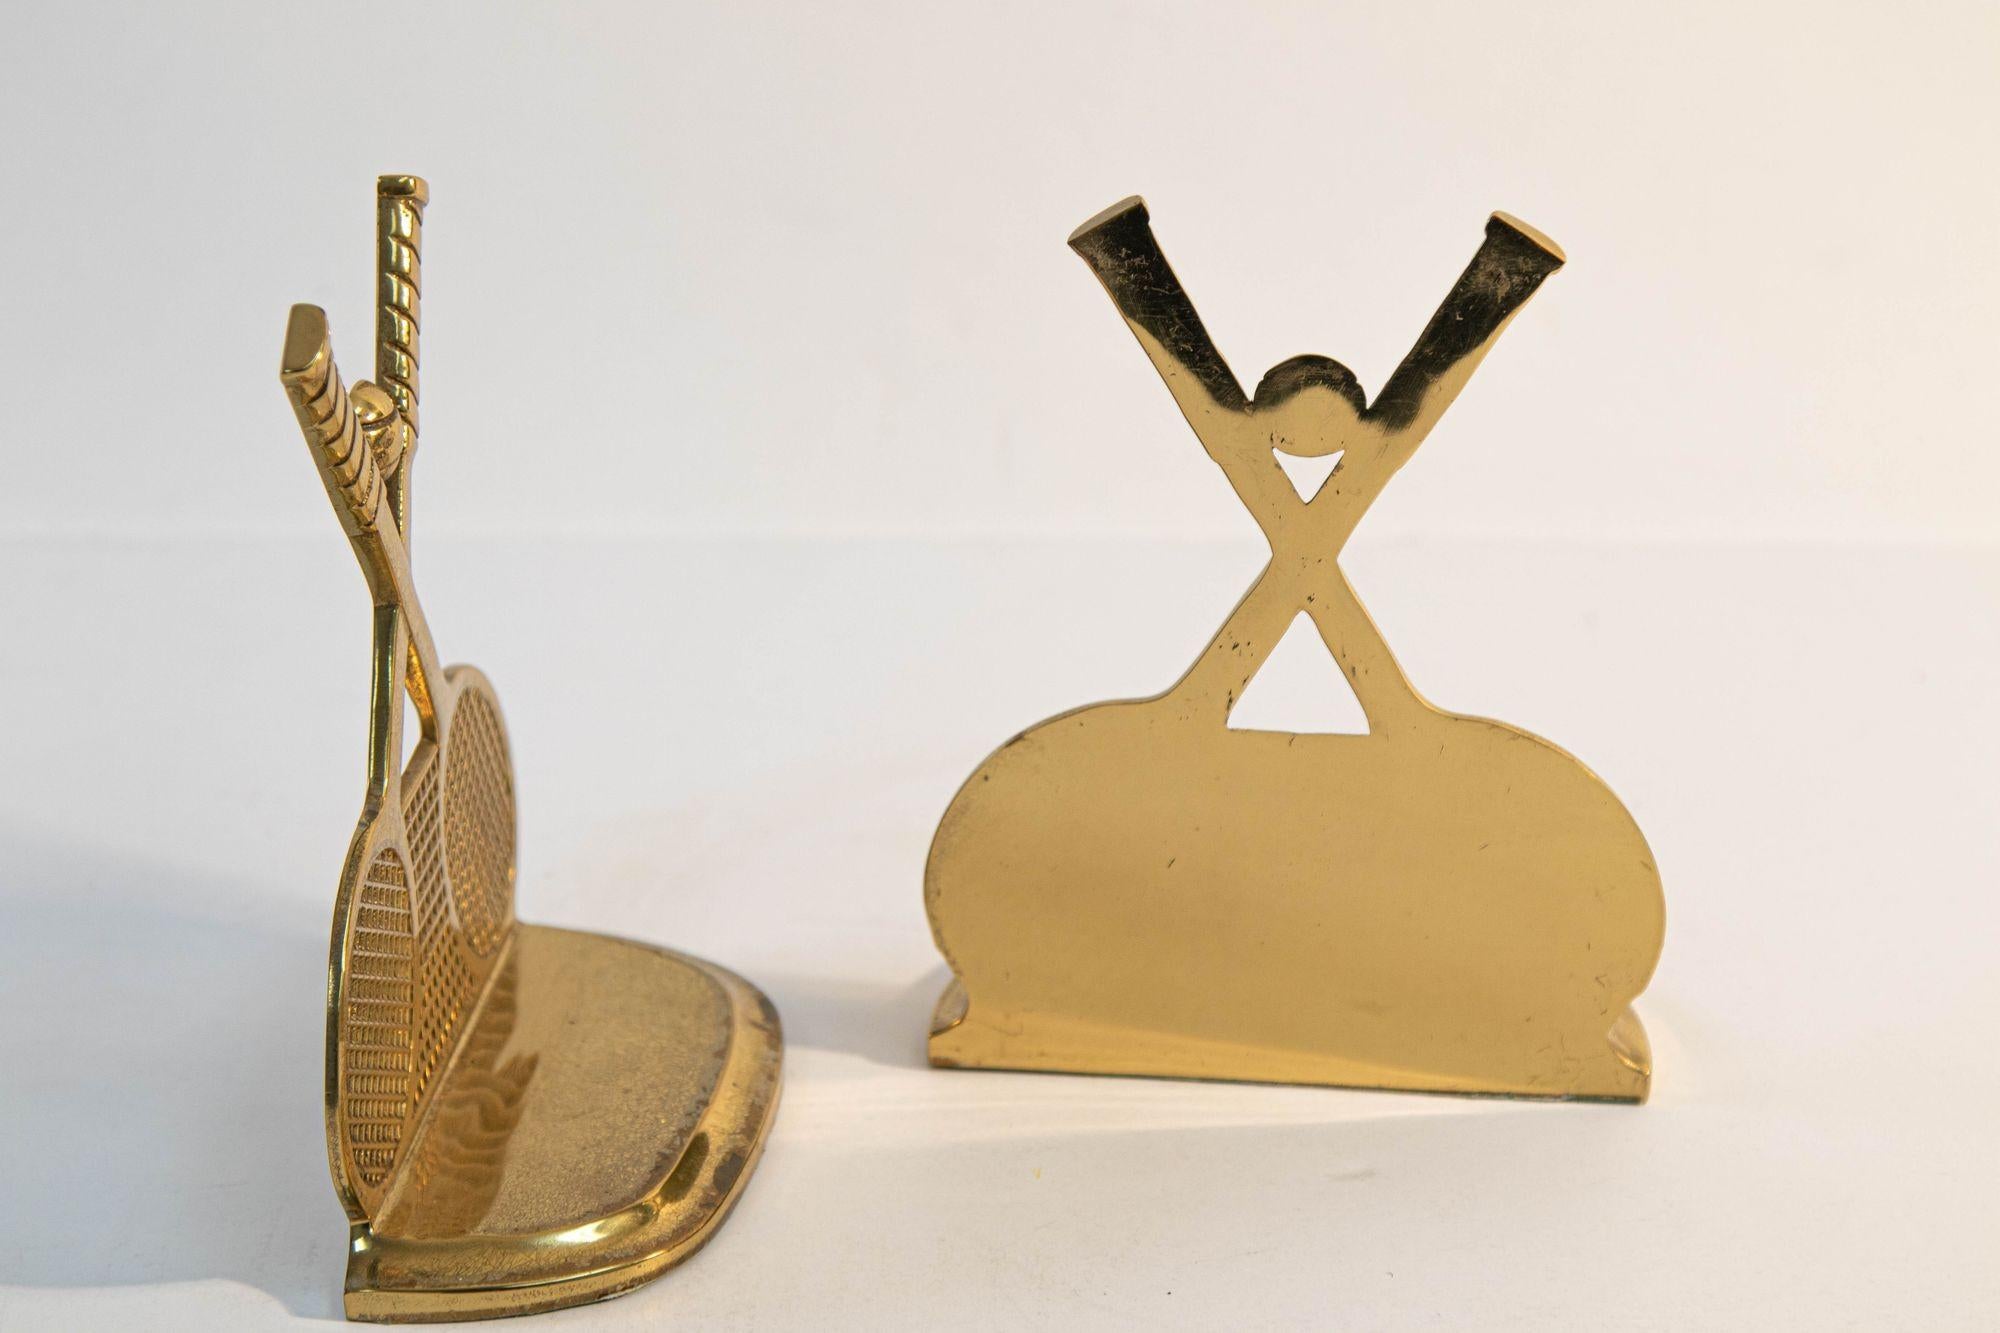 Mid-Century Modern Pair of Vintage Brass Tennis Racket and Ball Bookends Vintage 1970s Collectible